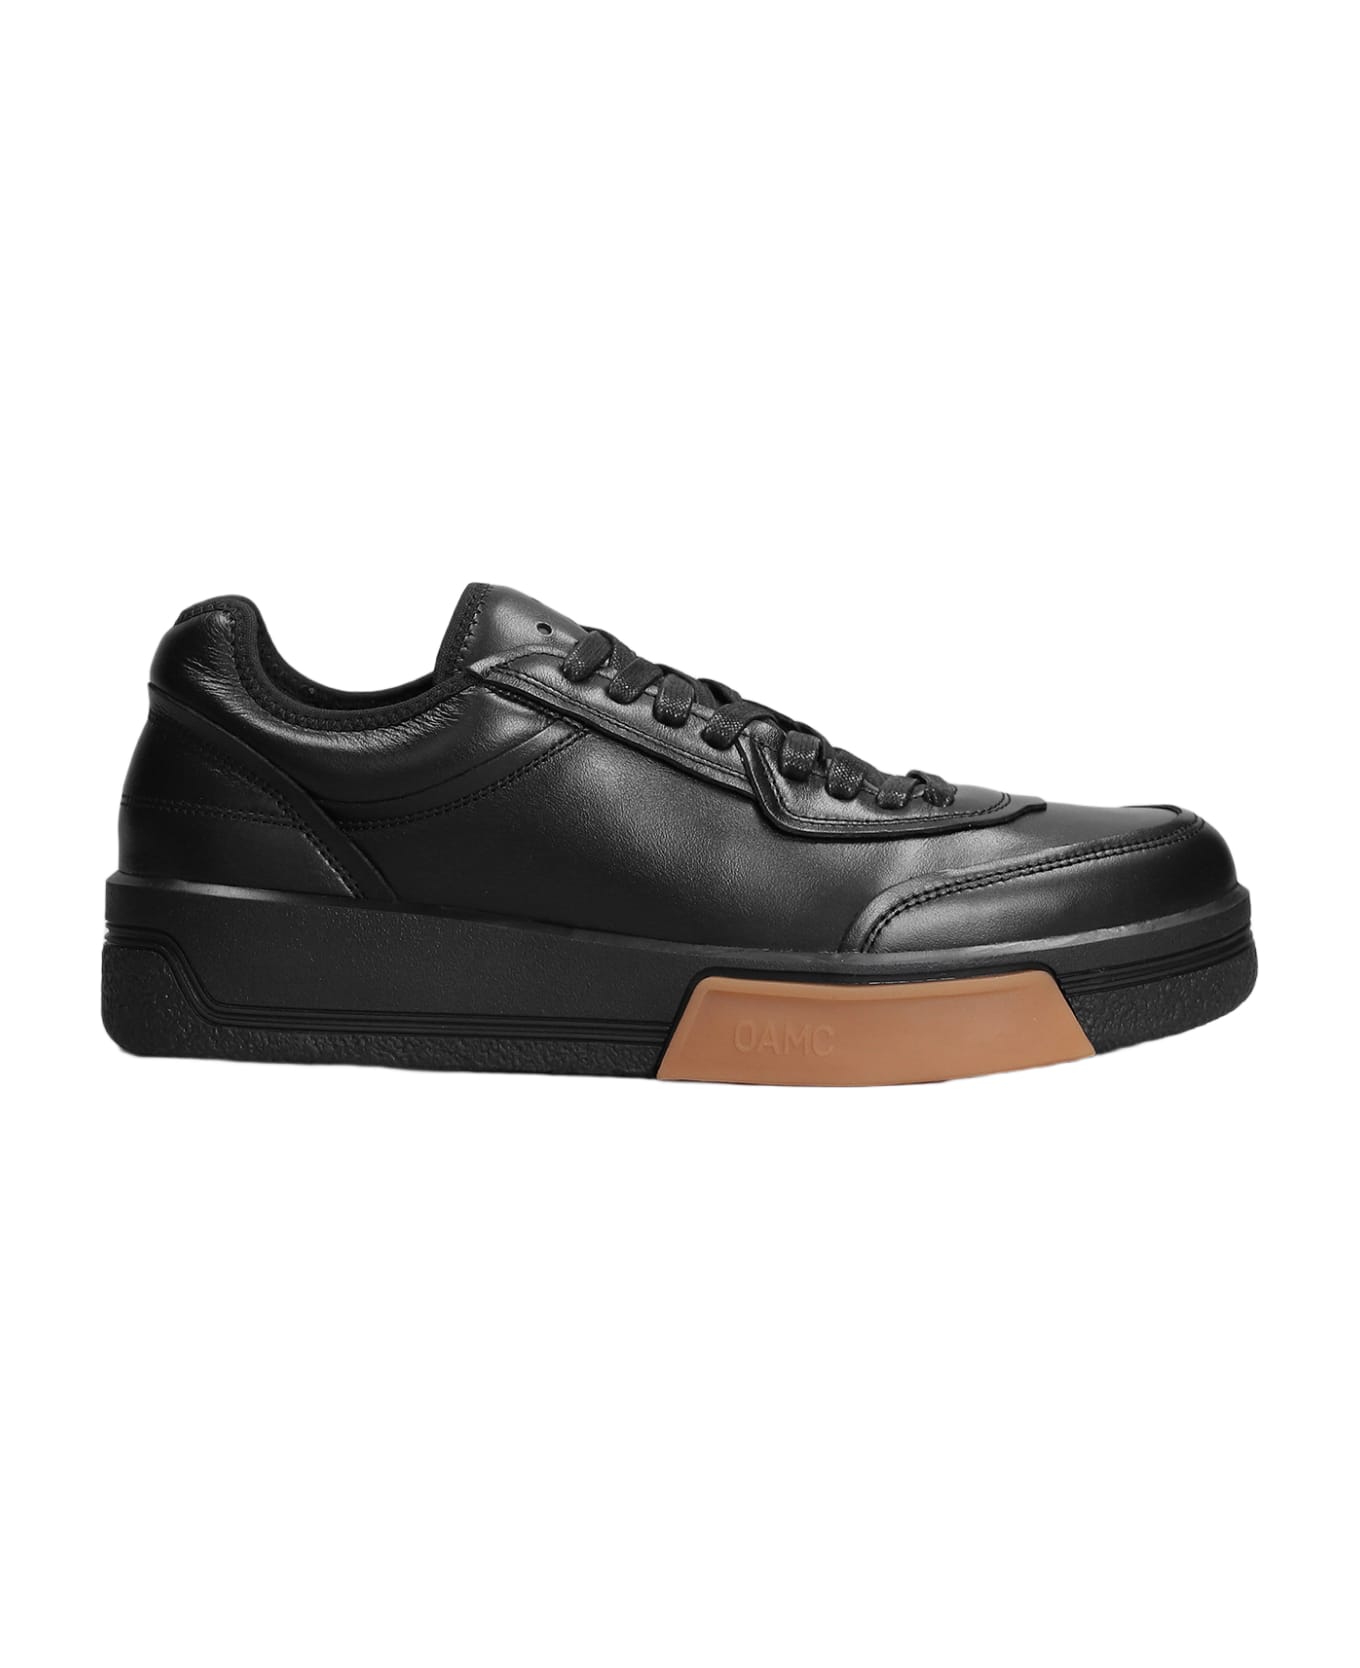 OAMC Cosmos Sneakers In Black Leather スニーカー